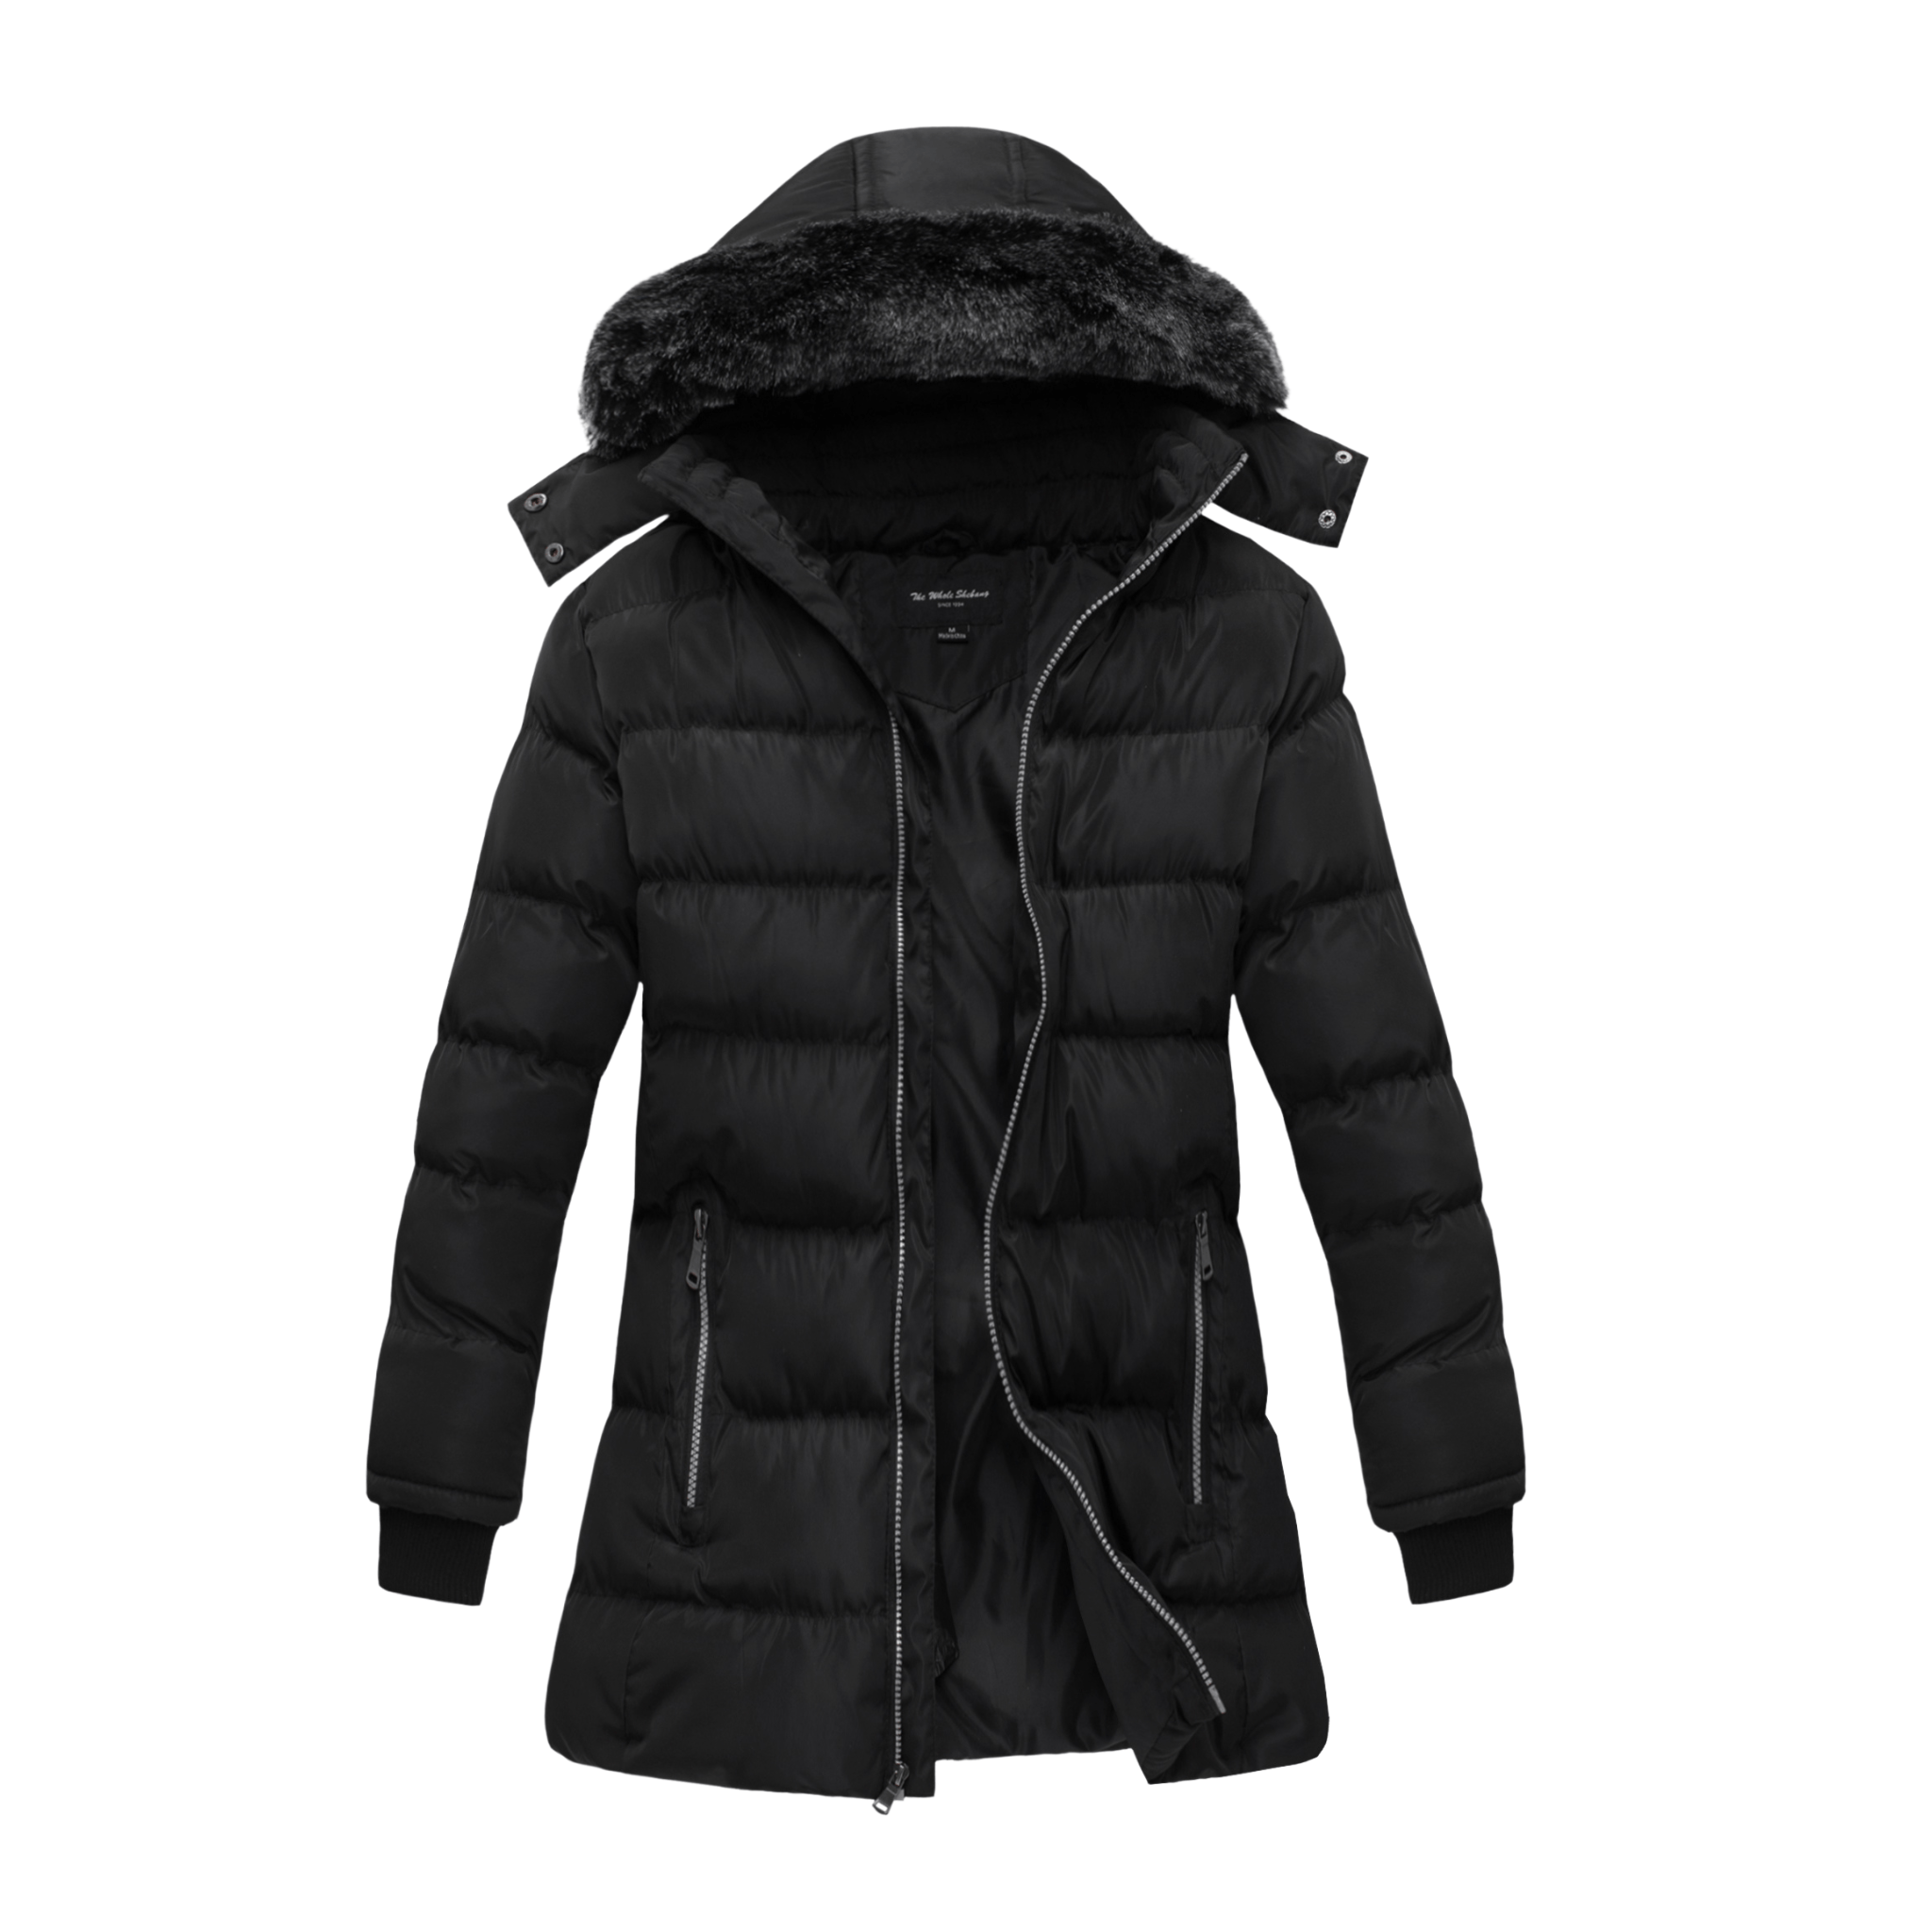 Thick Hoodie Womens Down Parka Winter Coat With Big Fur Collar Warm And  Cozy Loose Fit Jacket From Lu02, $48.79 | DHgate.Com